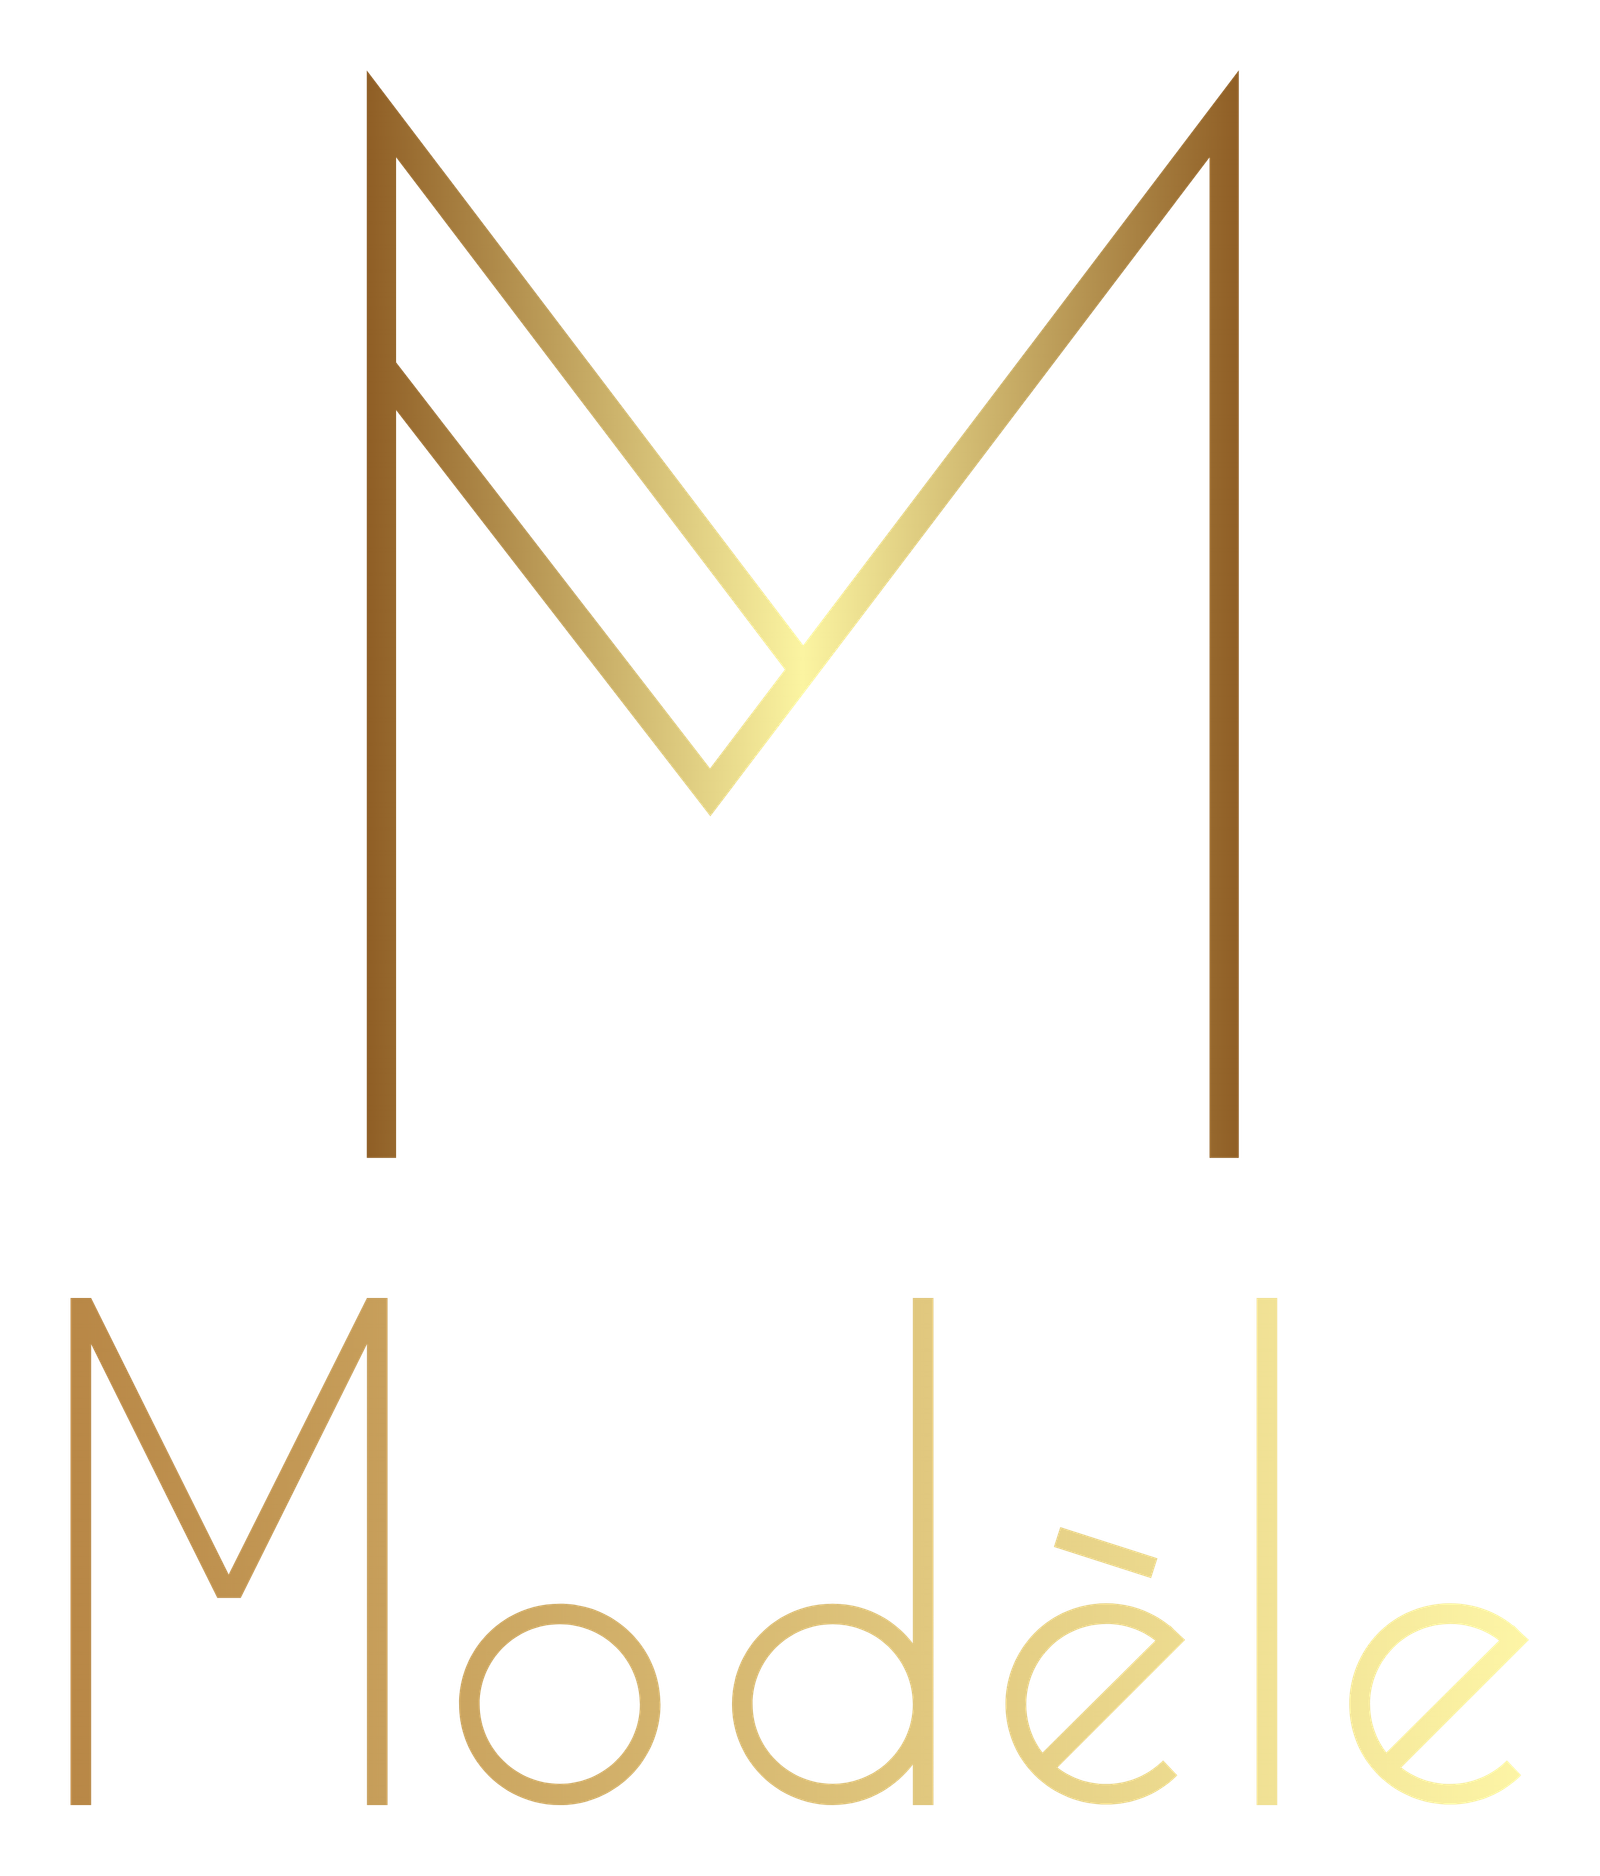 Gold 'M' logo representing Modele Primary Care, a leading personalized Internal Medicine Clinic.